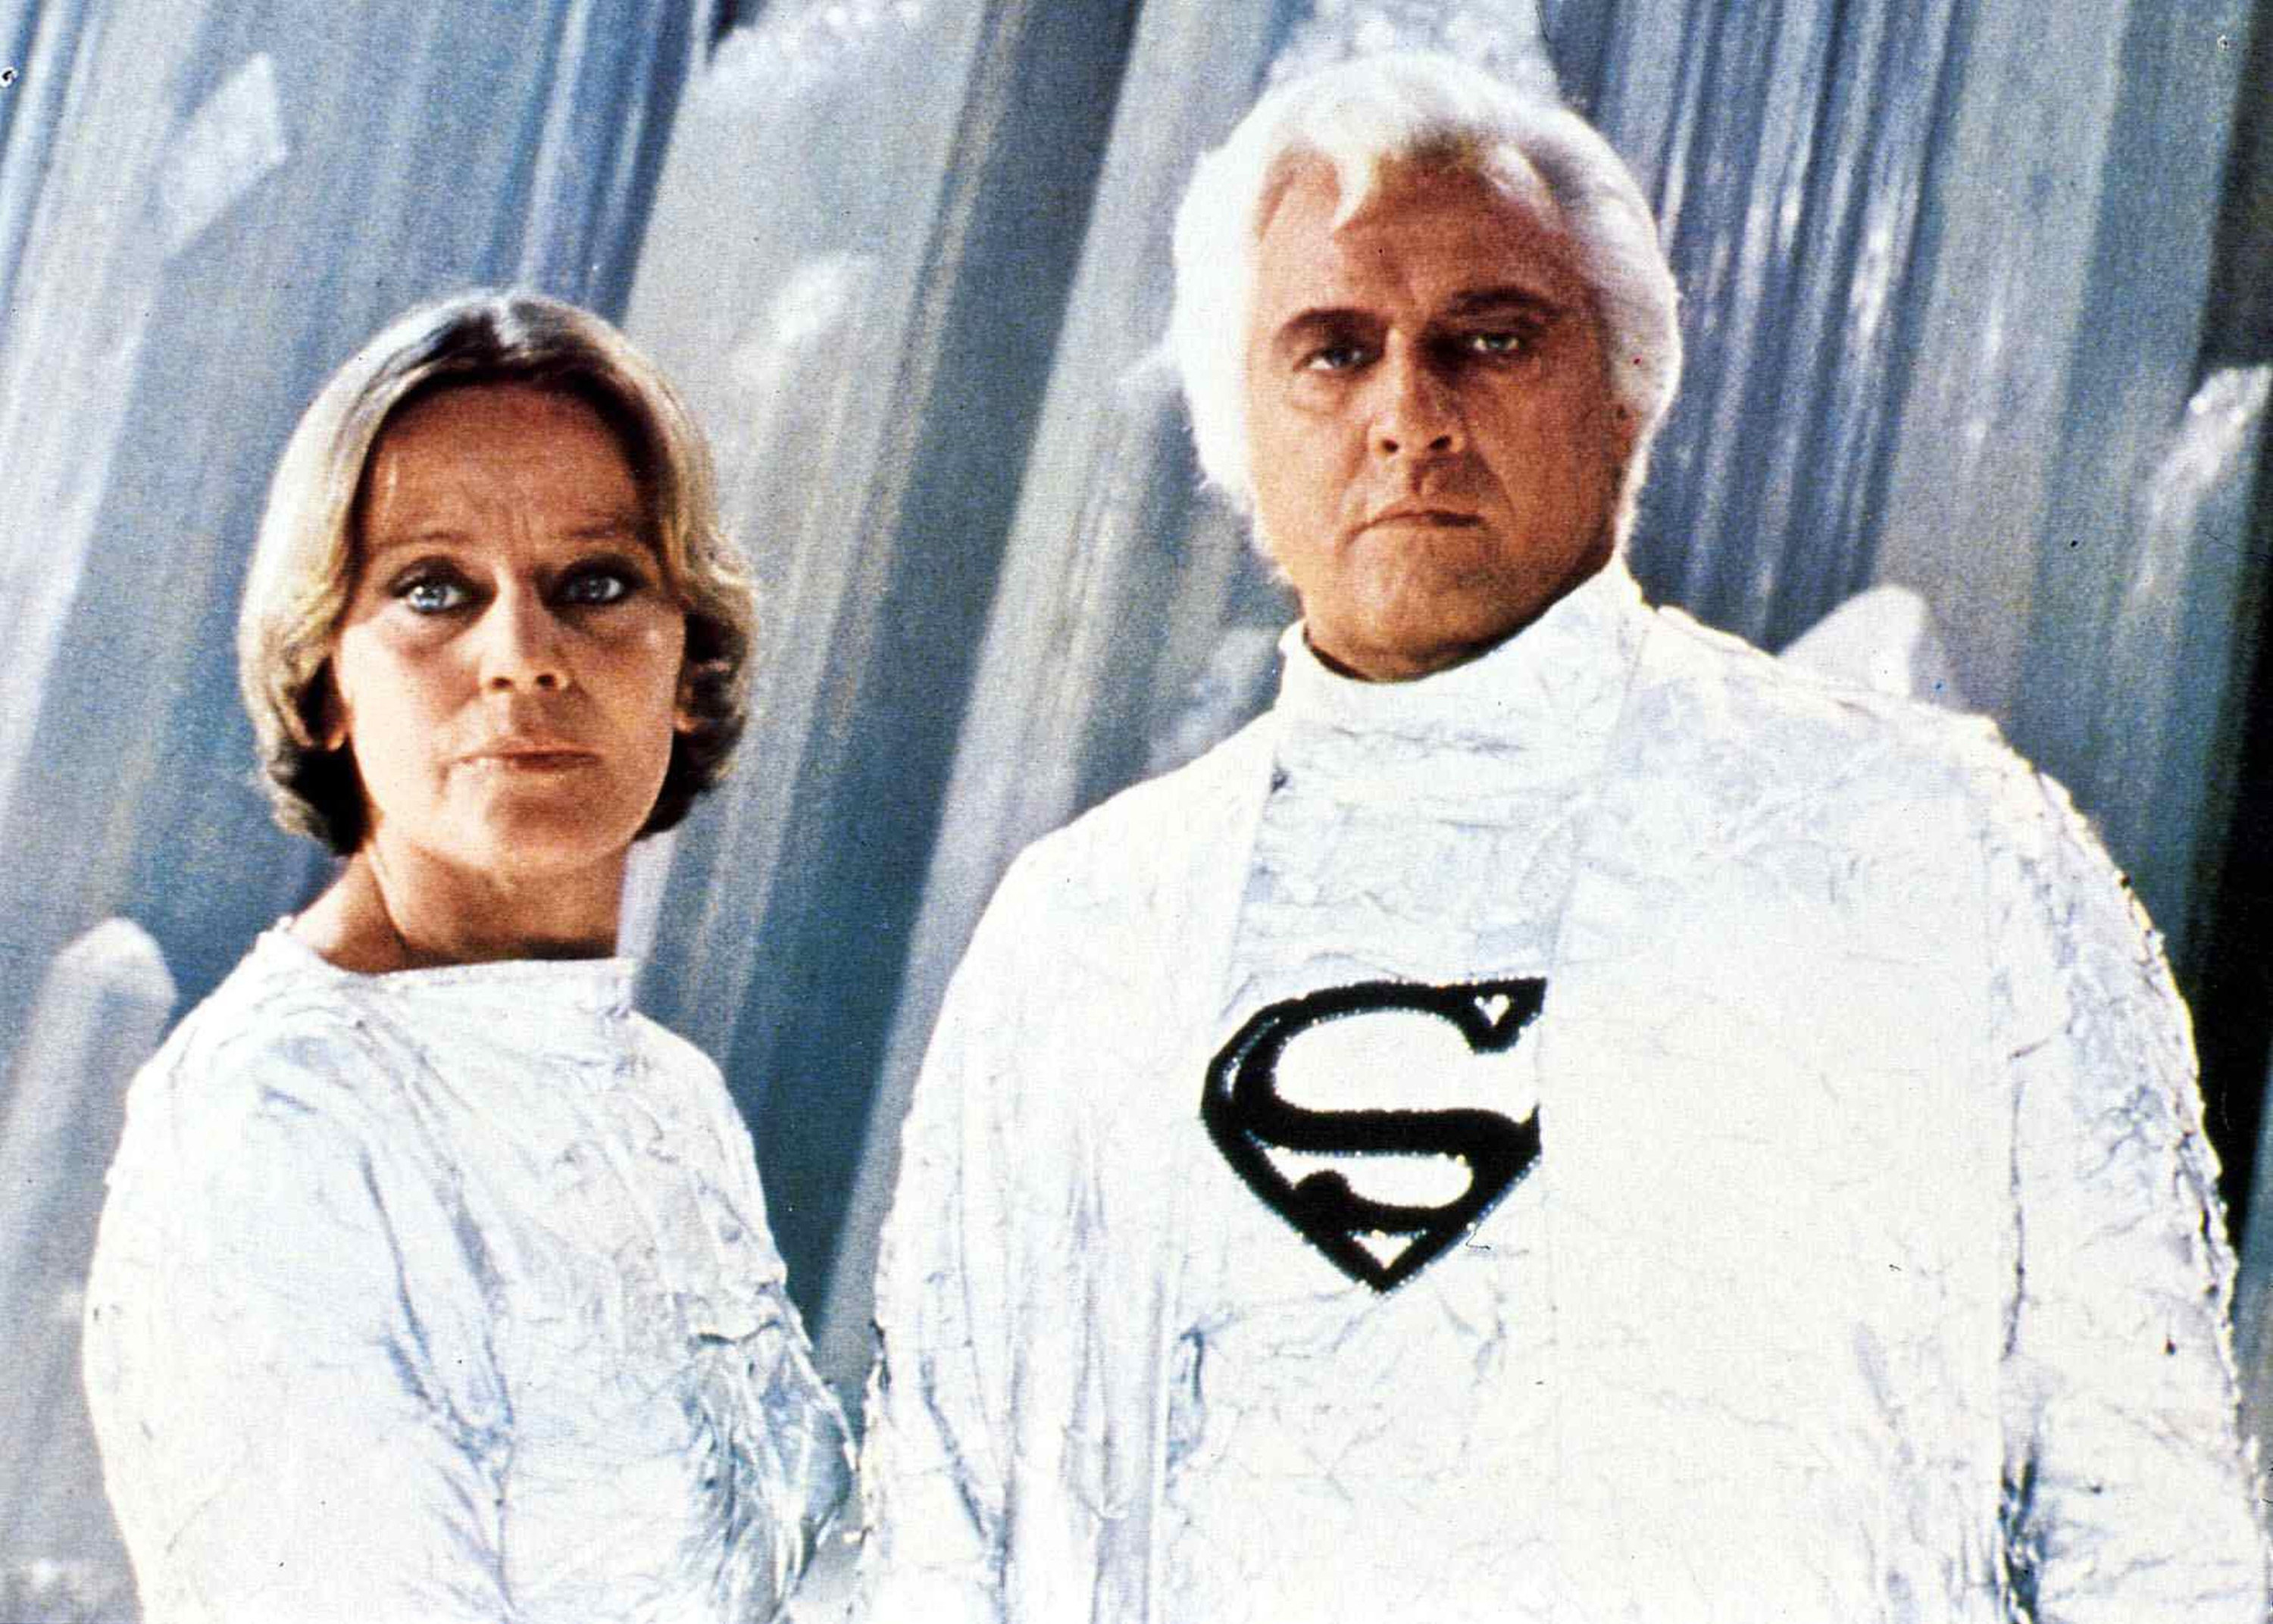 Marlon Brando stares ominously in an ornate white suit with an S-logo